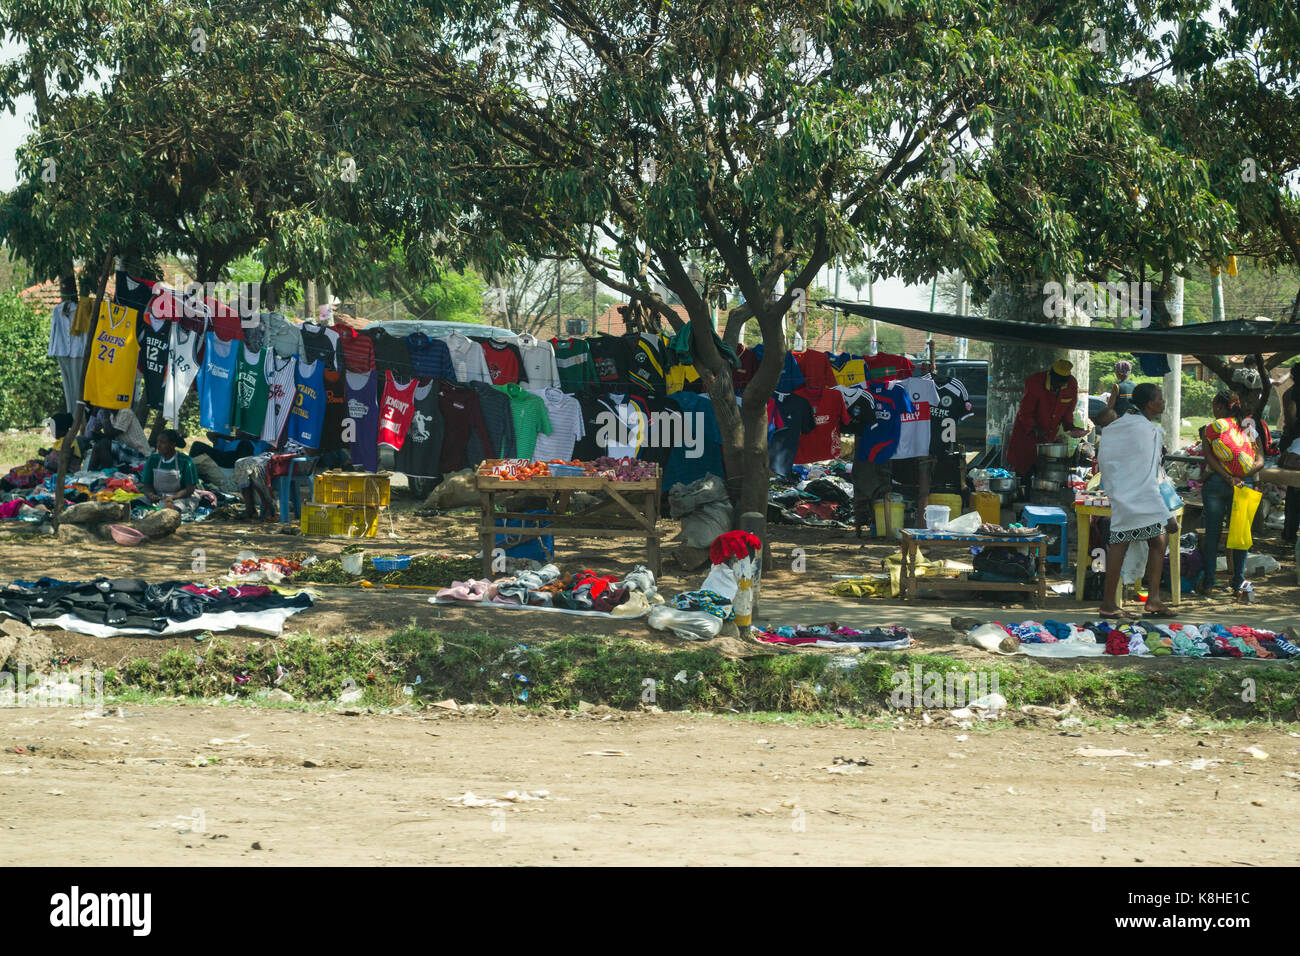 Clothes  hanging in shade and on ground on display under tree by roadside with people looking, Nairobi, Kenya Stock Photo